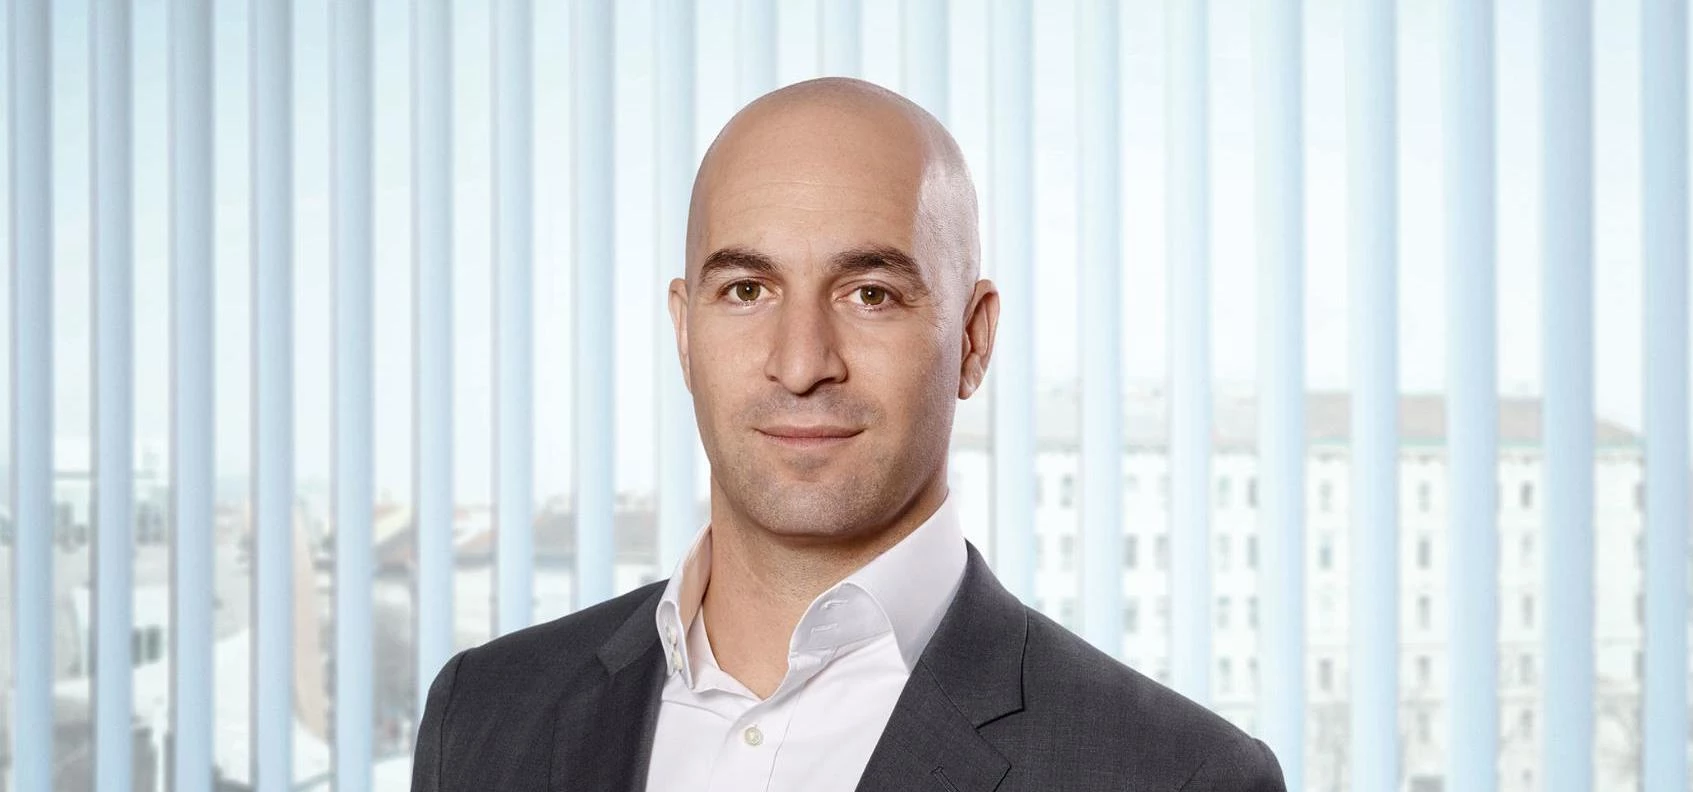 Emarsys COO, Ohad Hecht